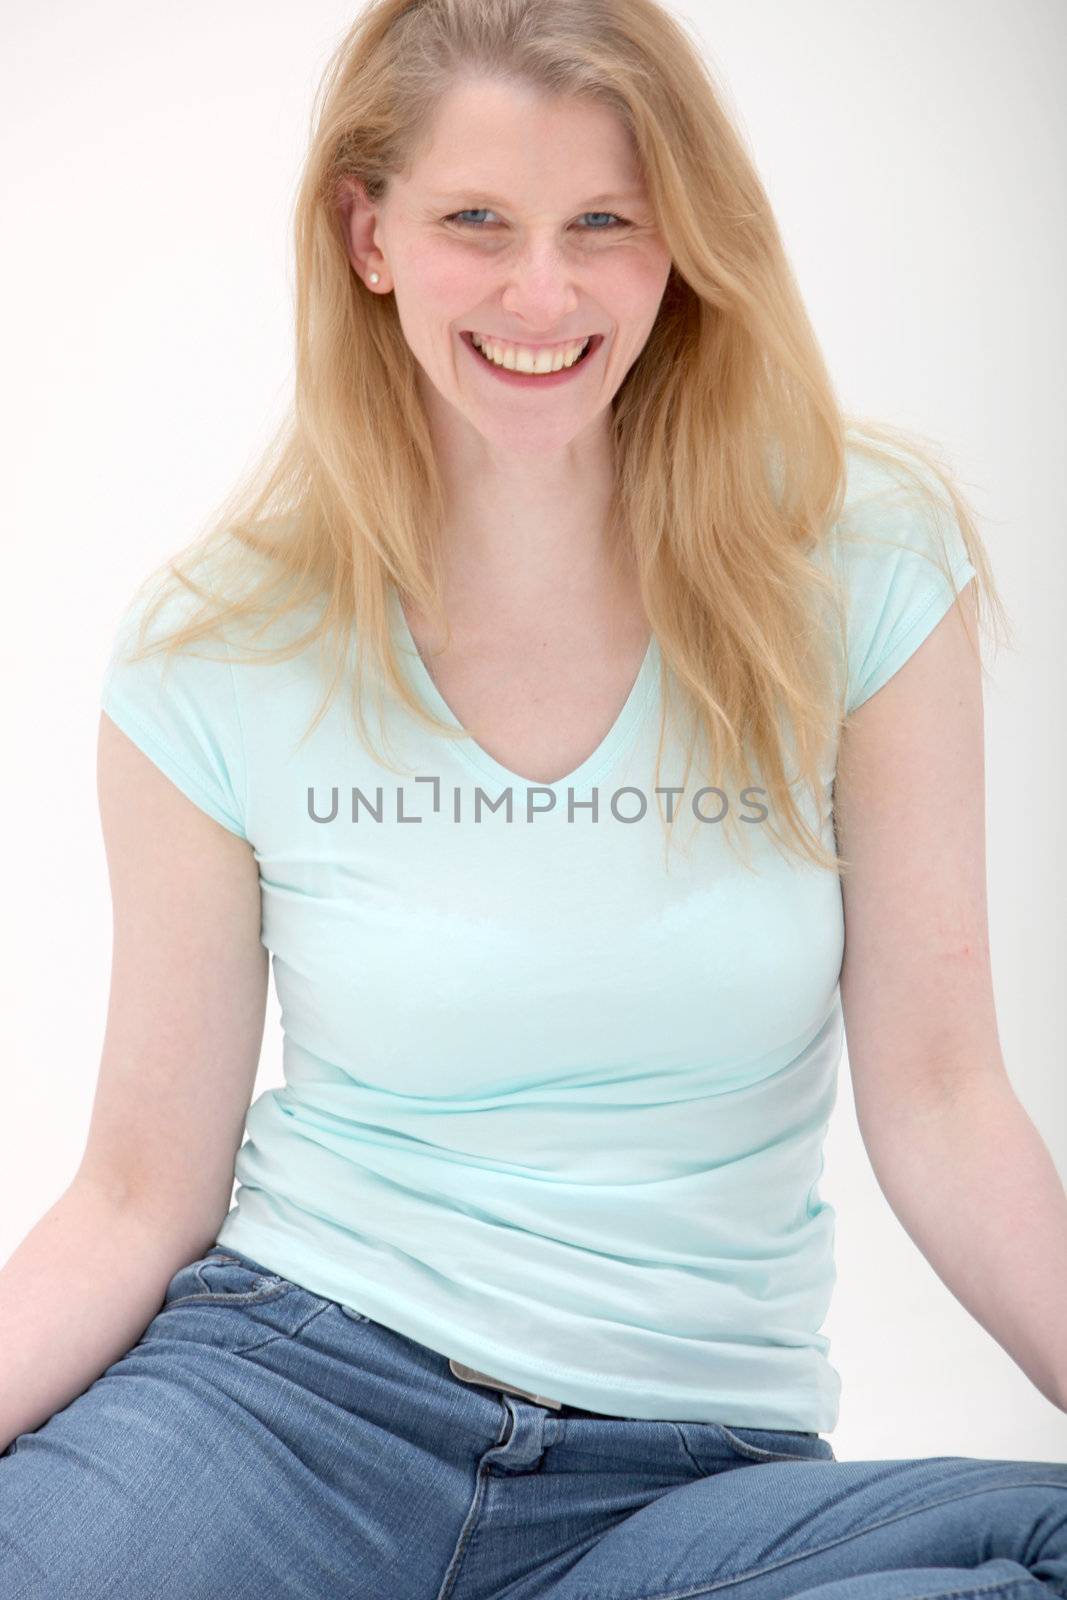 Studio shot of smiling young woman on white background